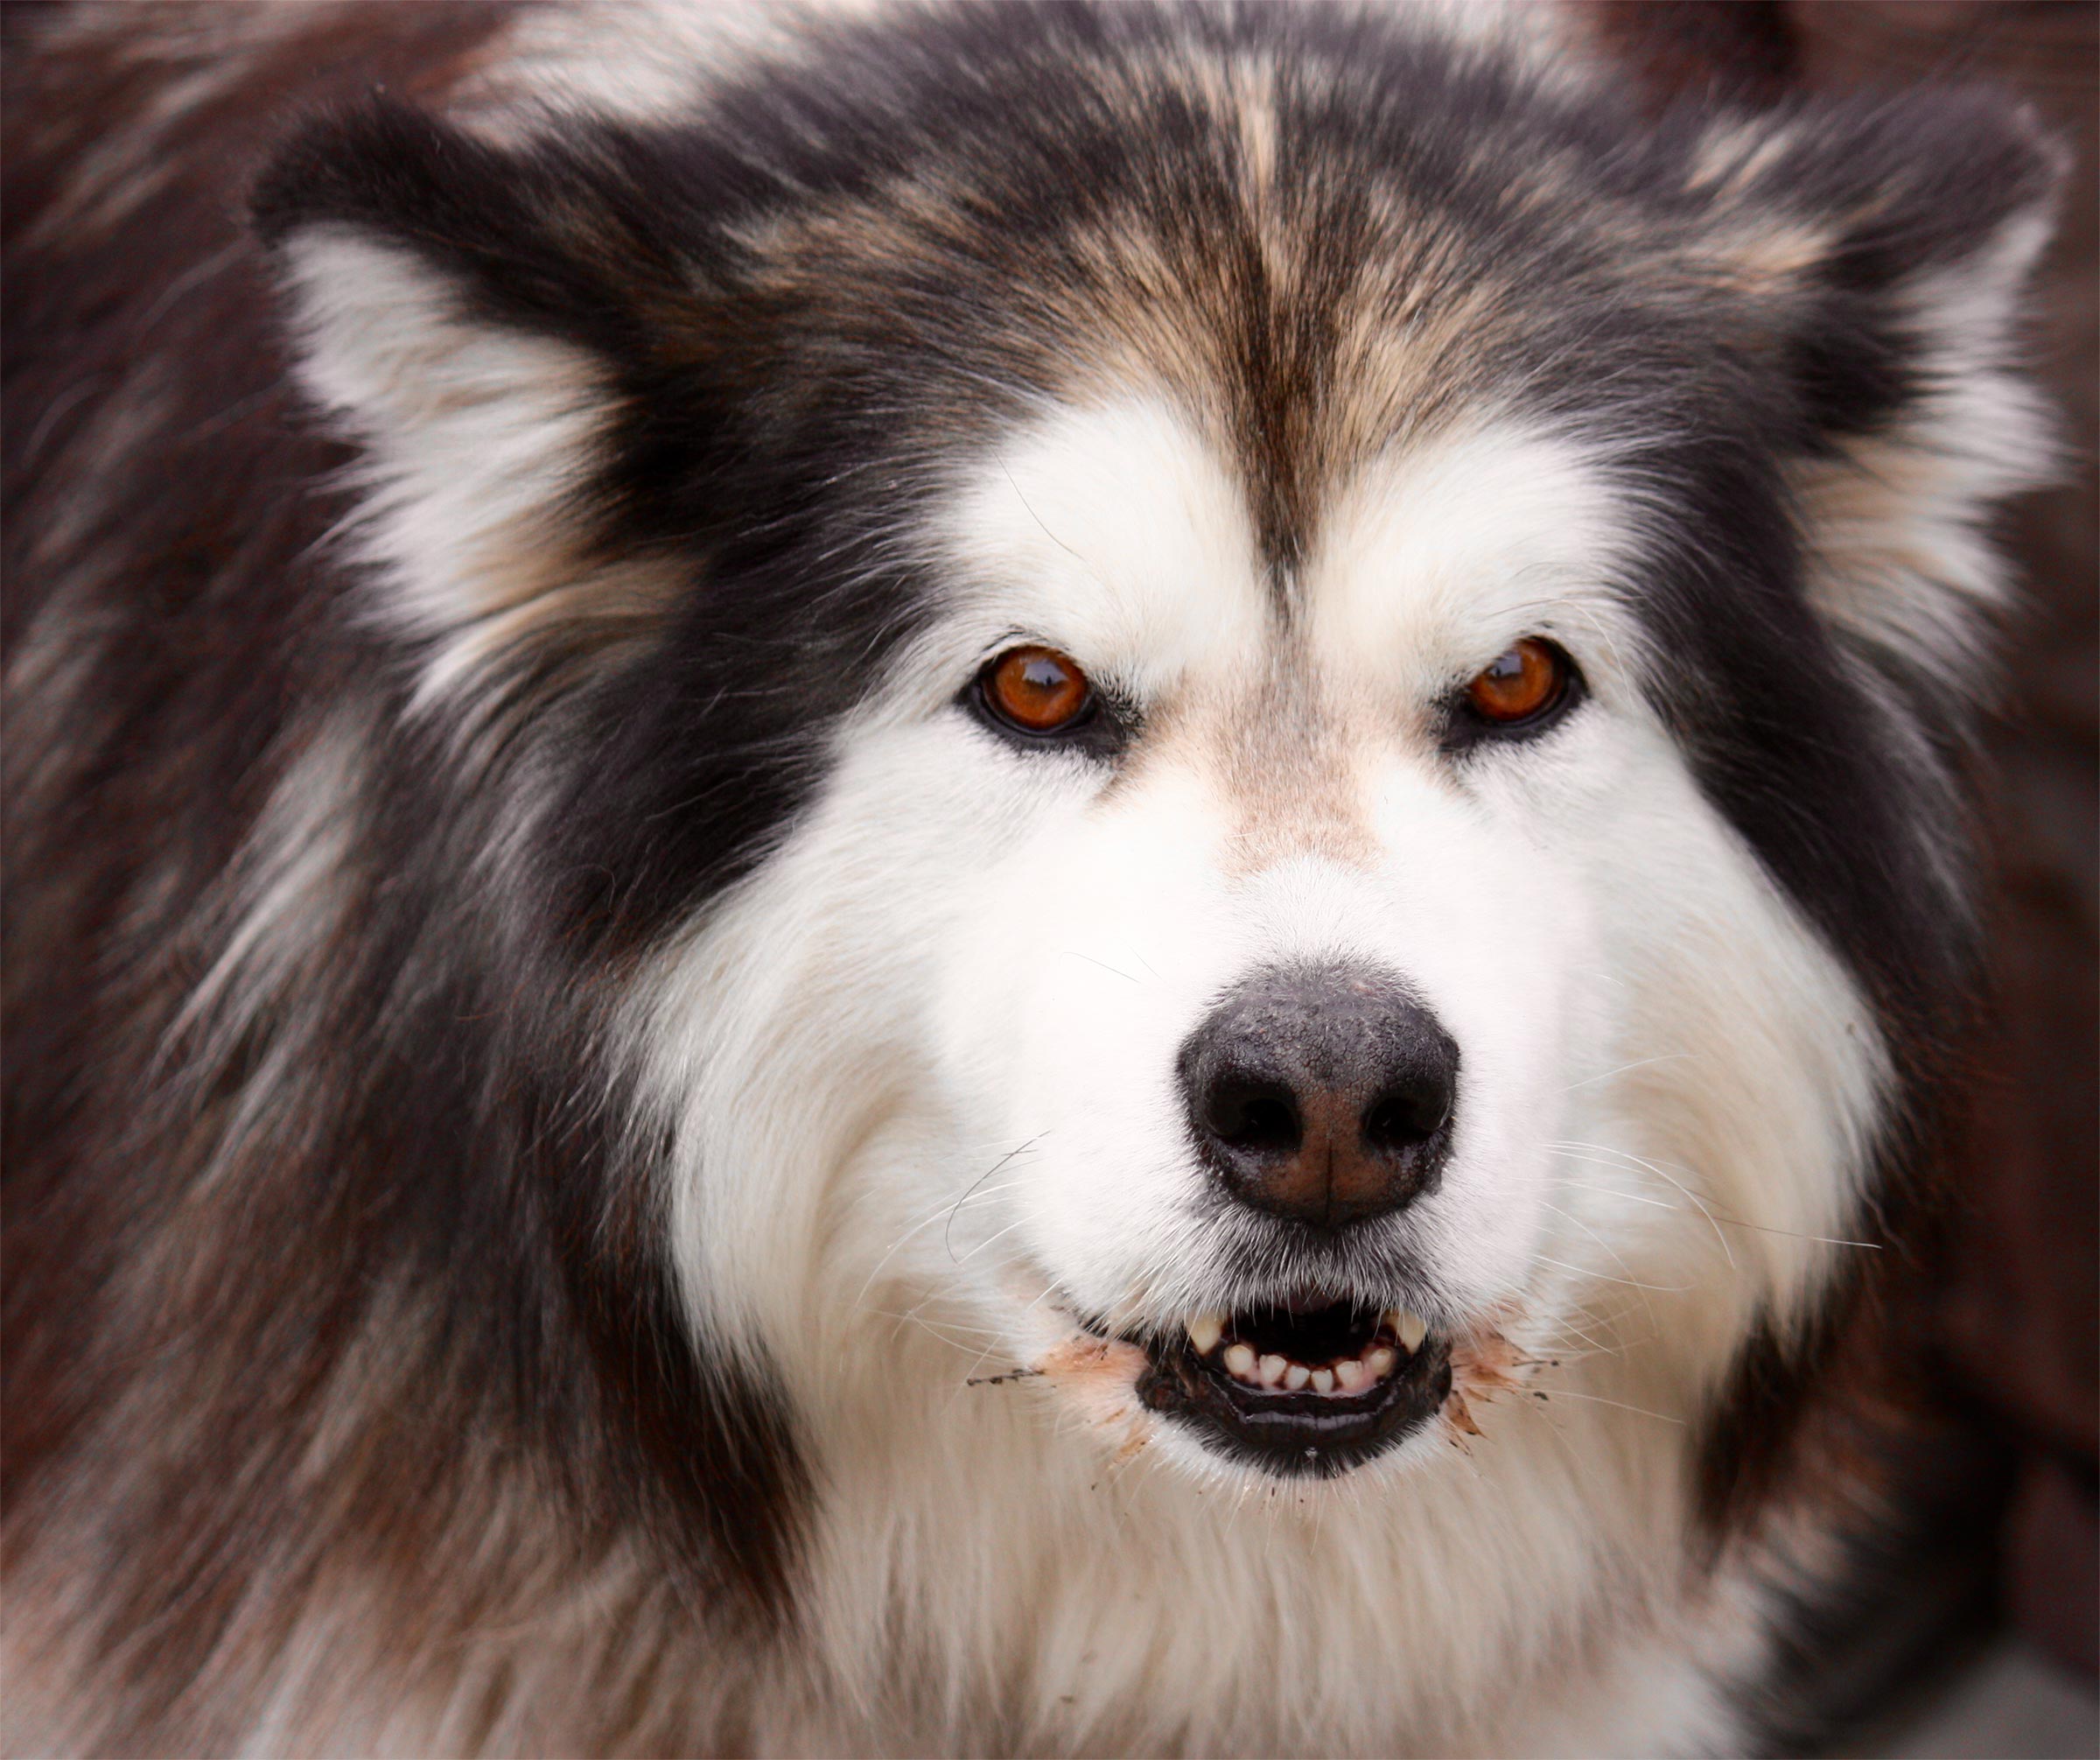 Photo by Roderick Peterson of a DIRE WOLF named Ghost